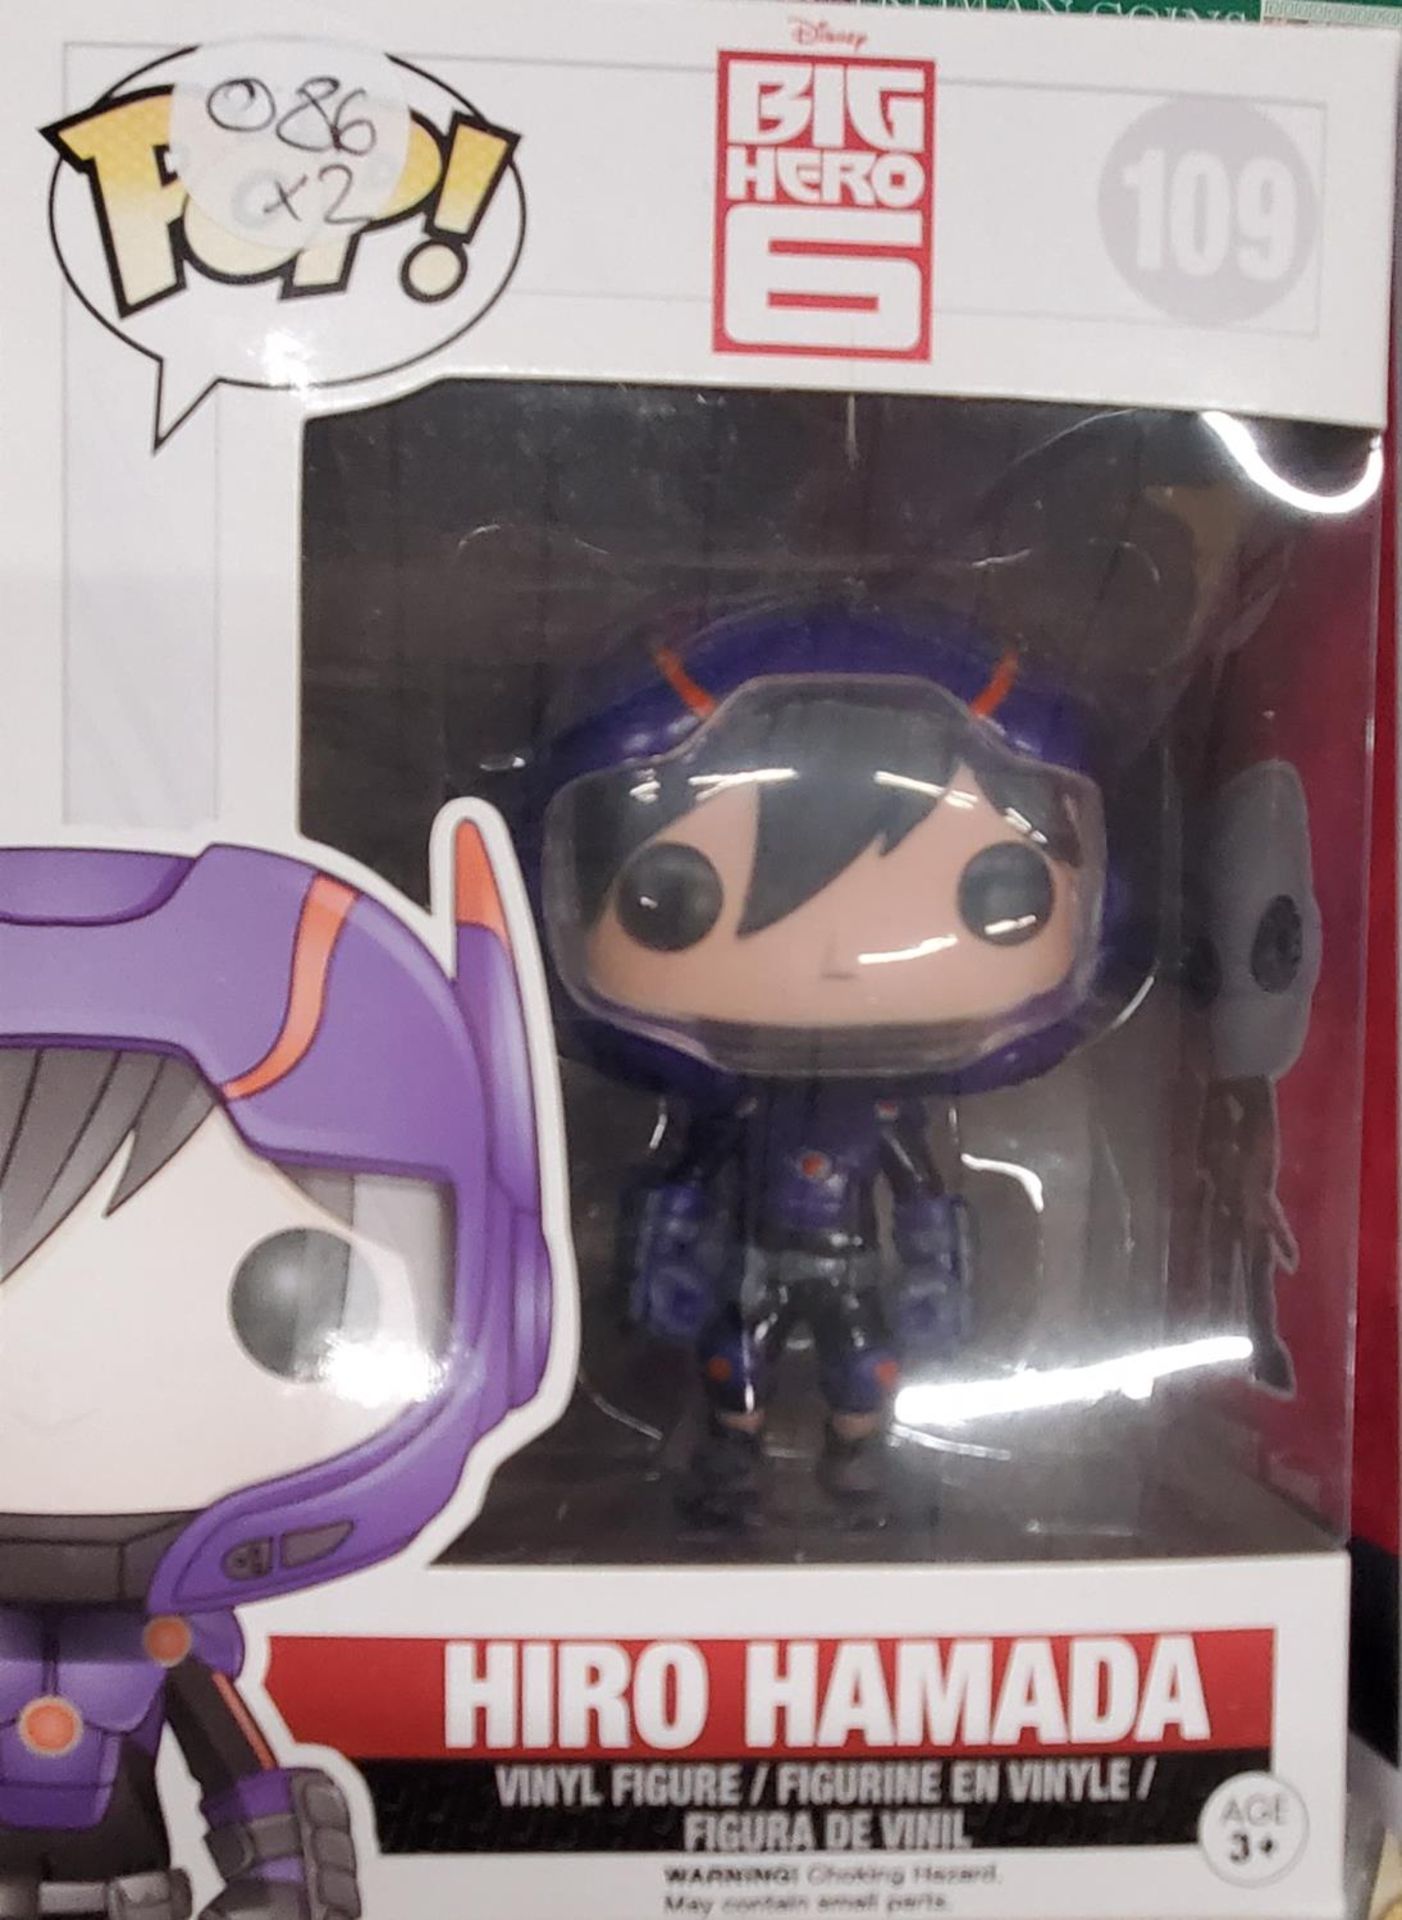 TWO FUNKO POP VINYL FIGURES TO INCLUDE 'HIRO HAMADA' AND 'DEADSHOT SUICIDE SQUAD' - AS NEW IN - Image 2 of 3